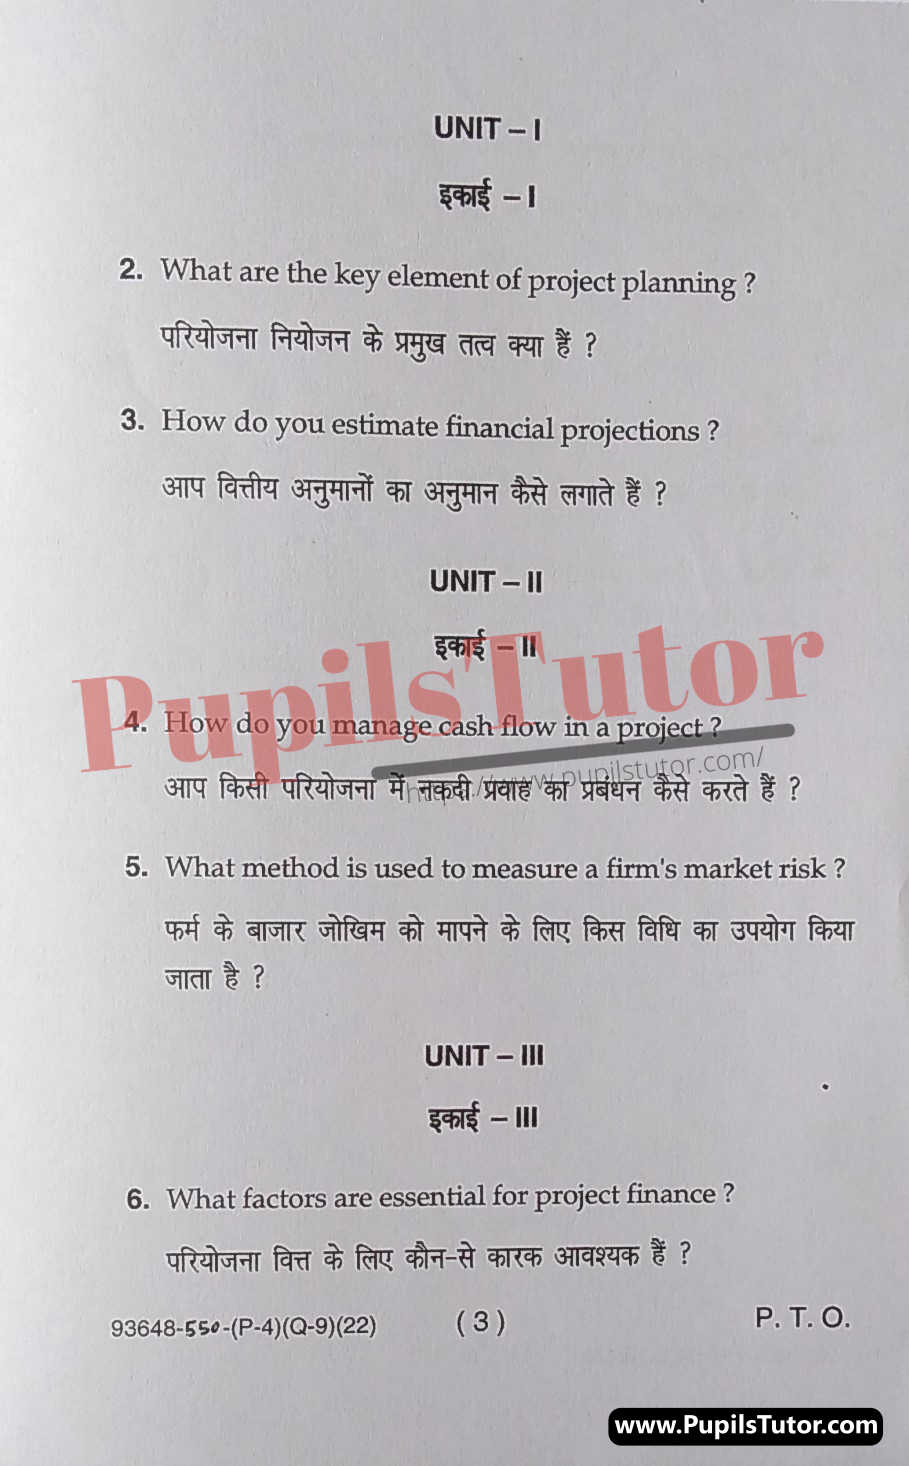 Free Download PDF Of M.D. University B.Com. (Hons.) Sixth Semester Latest Question Paper For Project Planning And Management Subject (Page 3) - https://www.pupilstutor.com